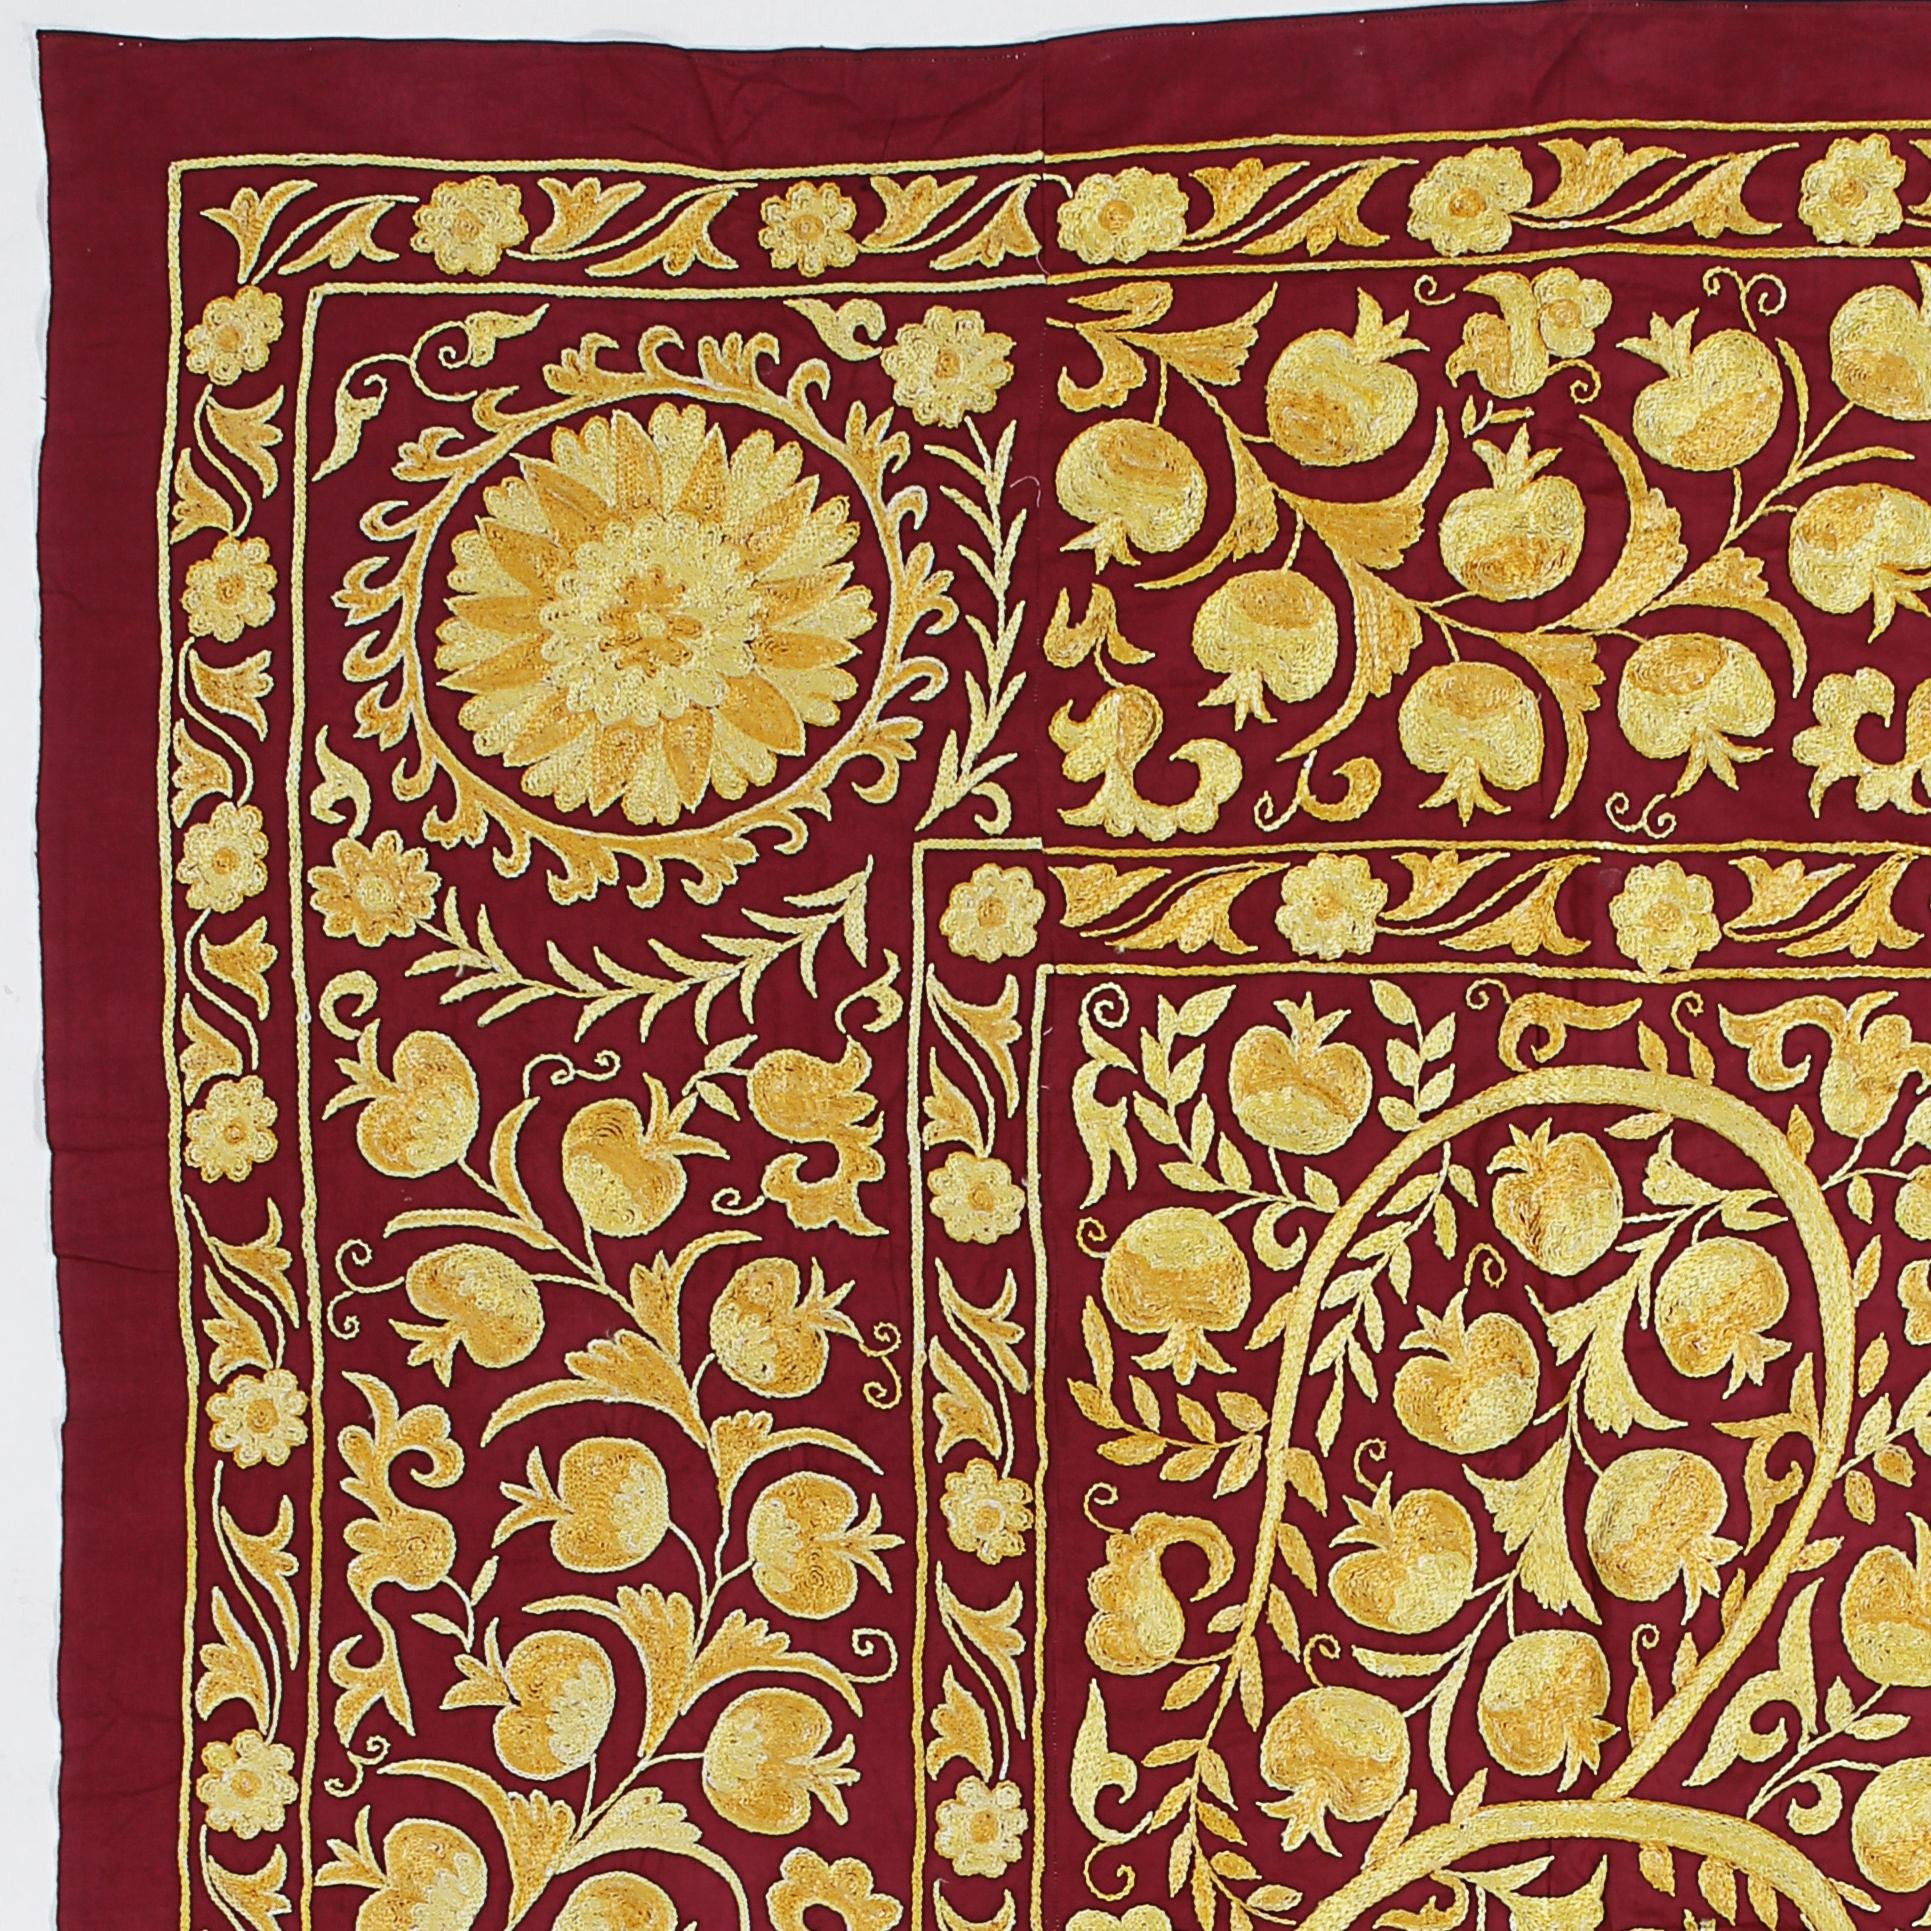 Suzani 4.8x7 Ft Uzbek Silk Embroidery Wall Hanging, Burgundy Red and Yellow Bed Cover For Sale